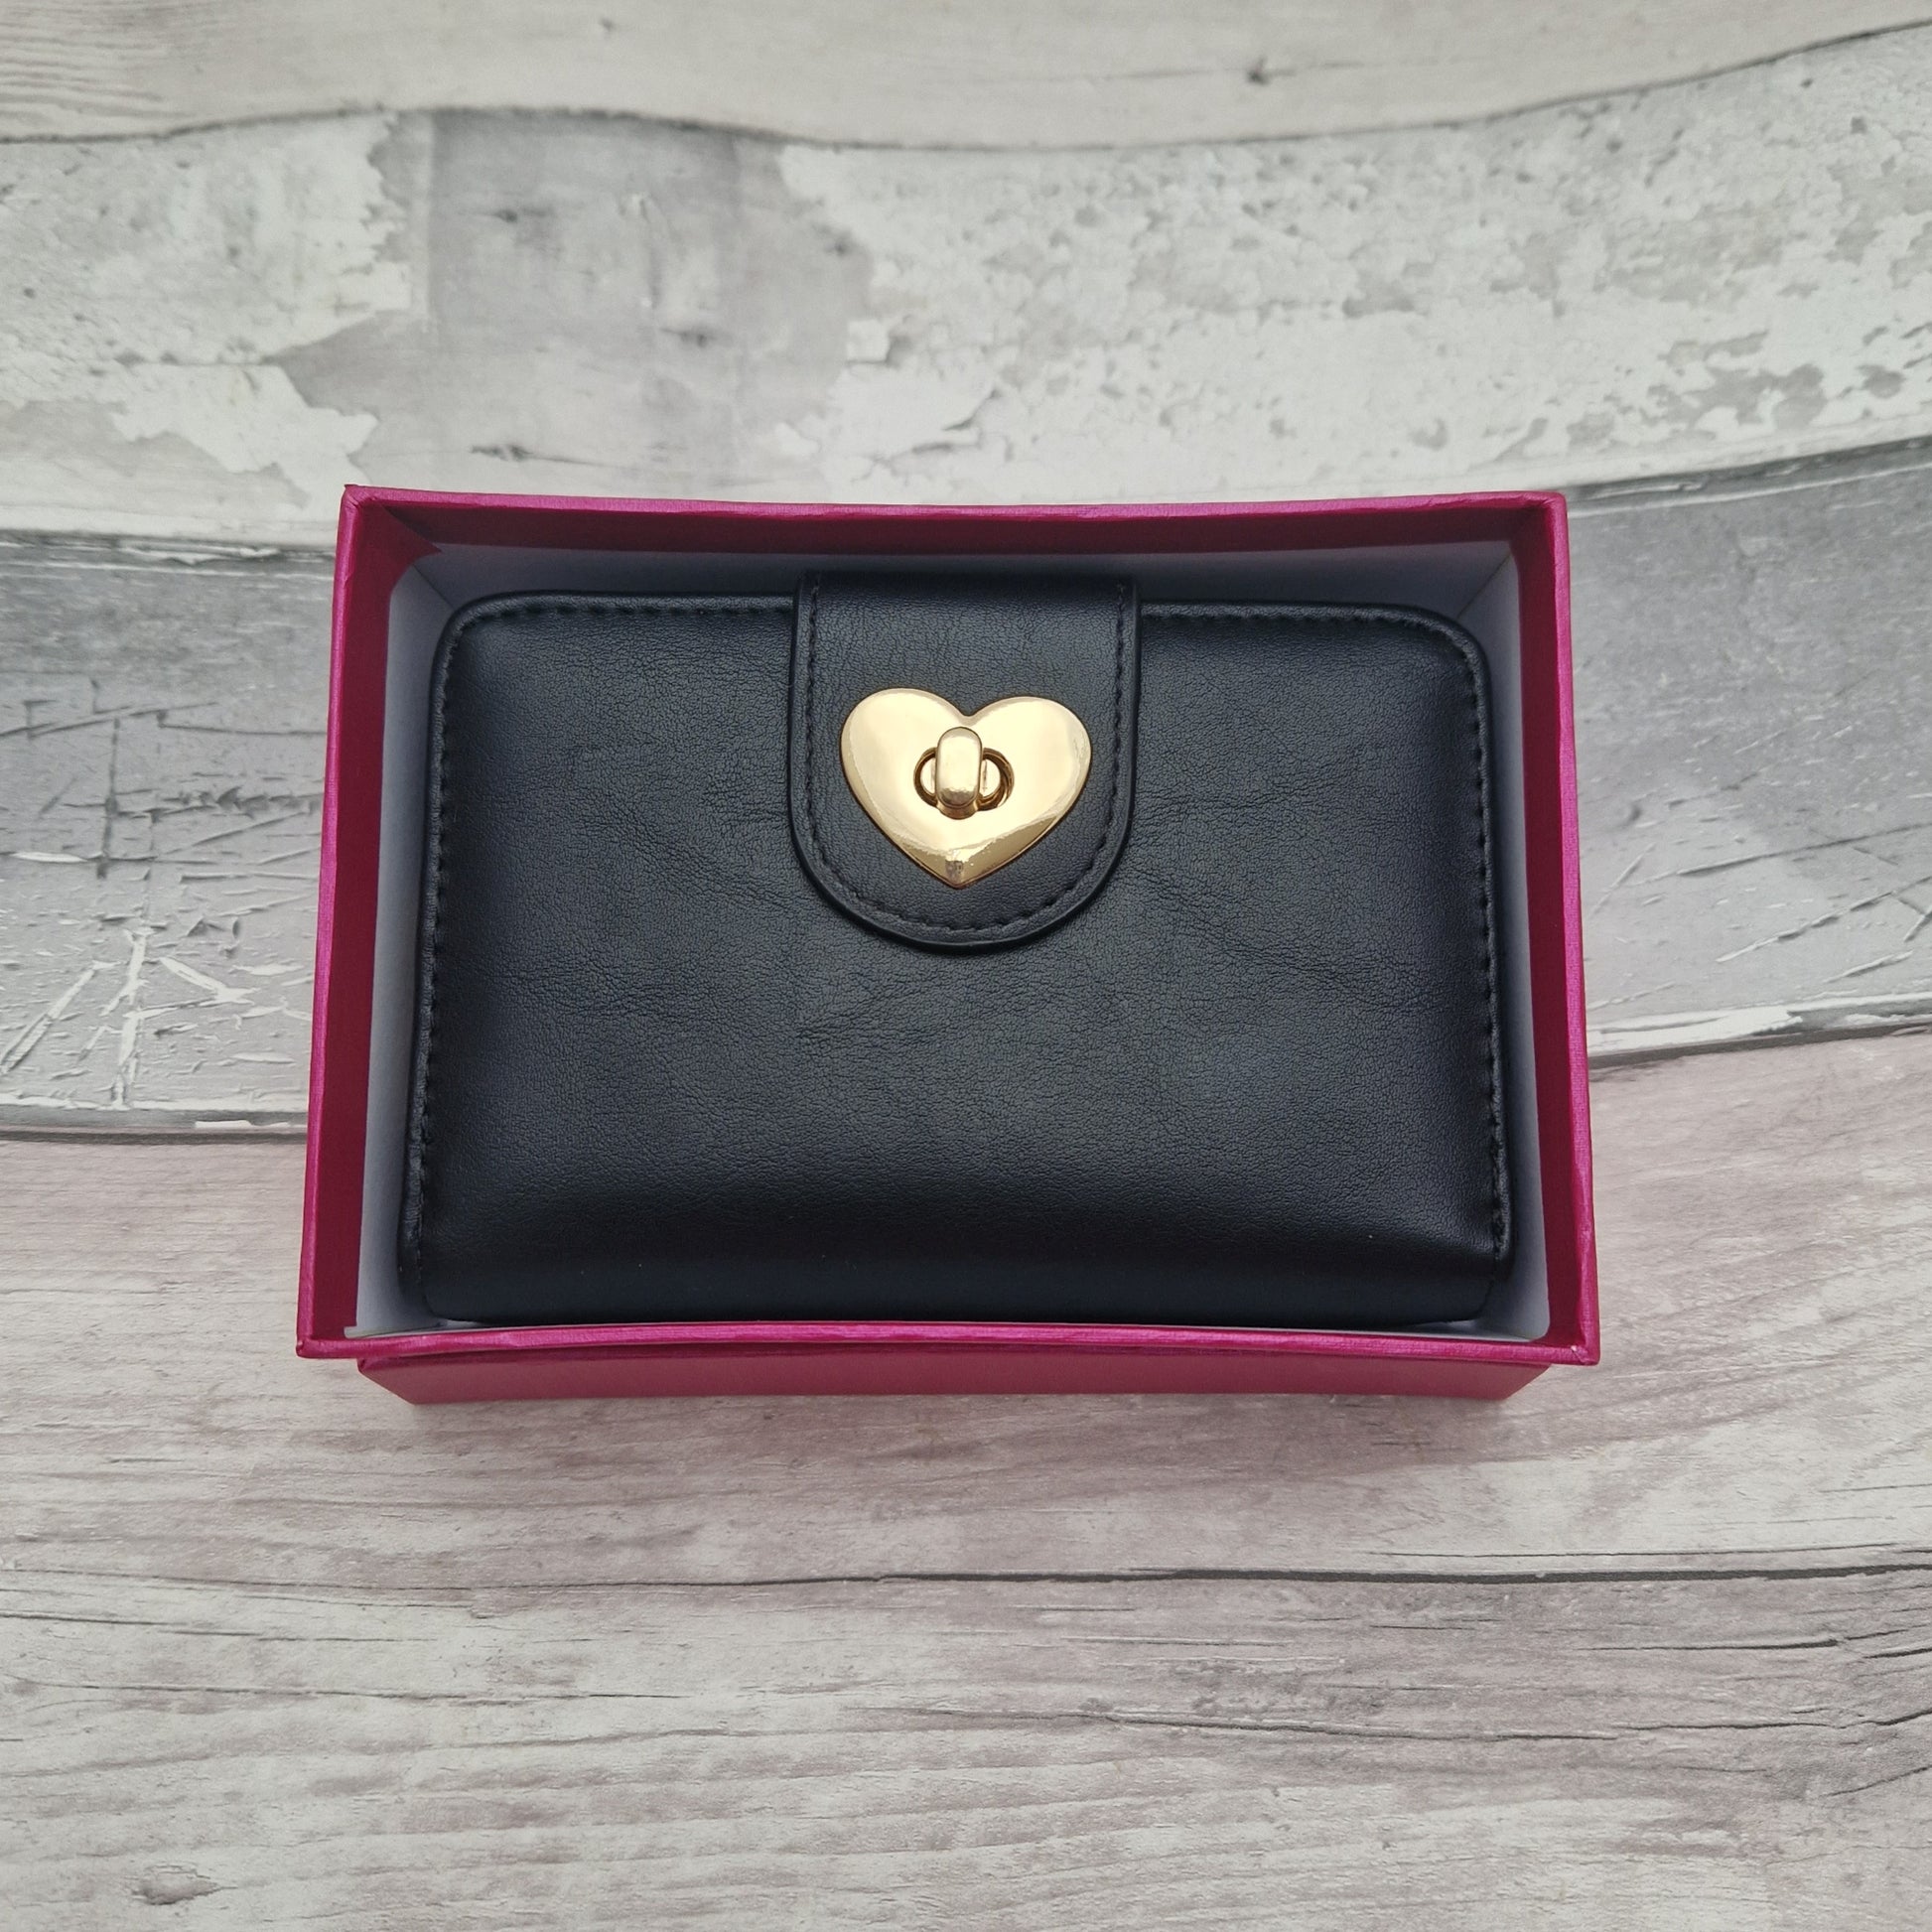 Black purse with love heart shaped closer